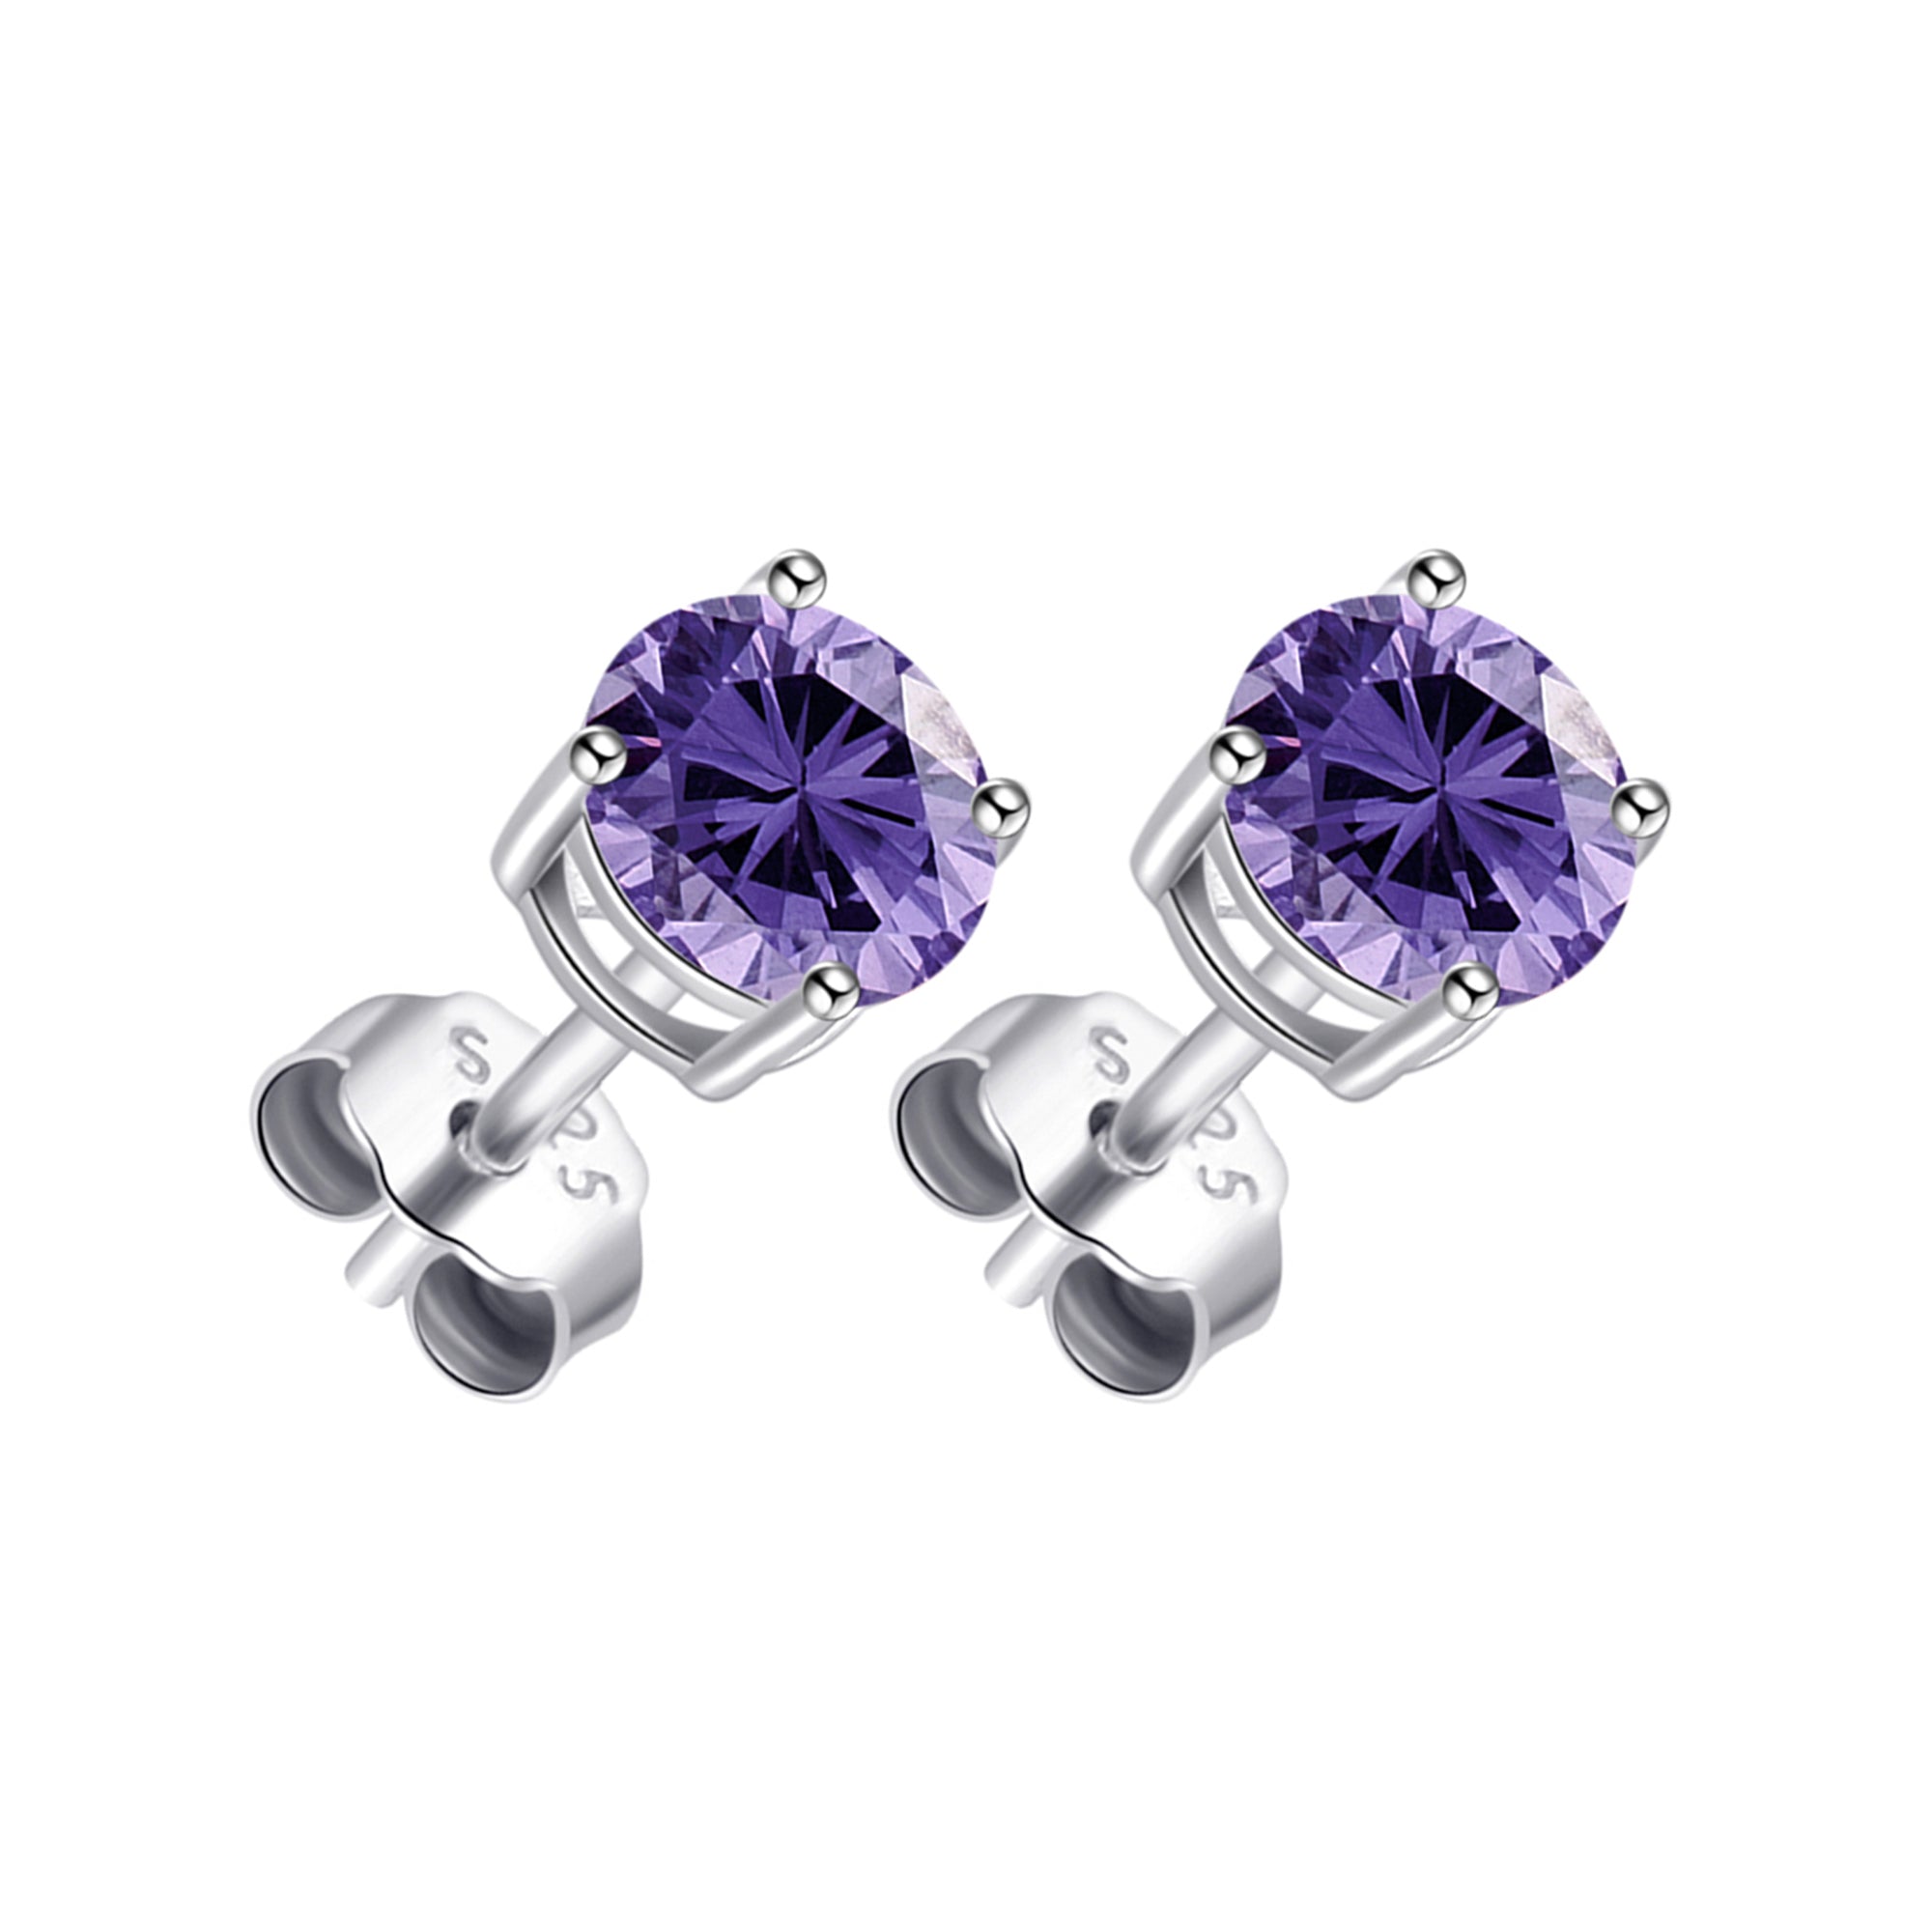 Sterling Silver Light Purple Earrings Created with Zircondia® Crystals by Philip Jones Jewellery